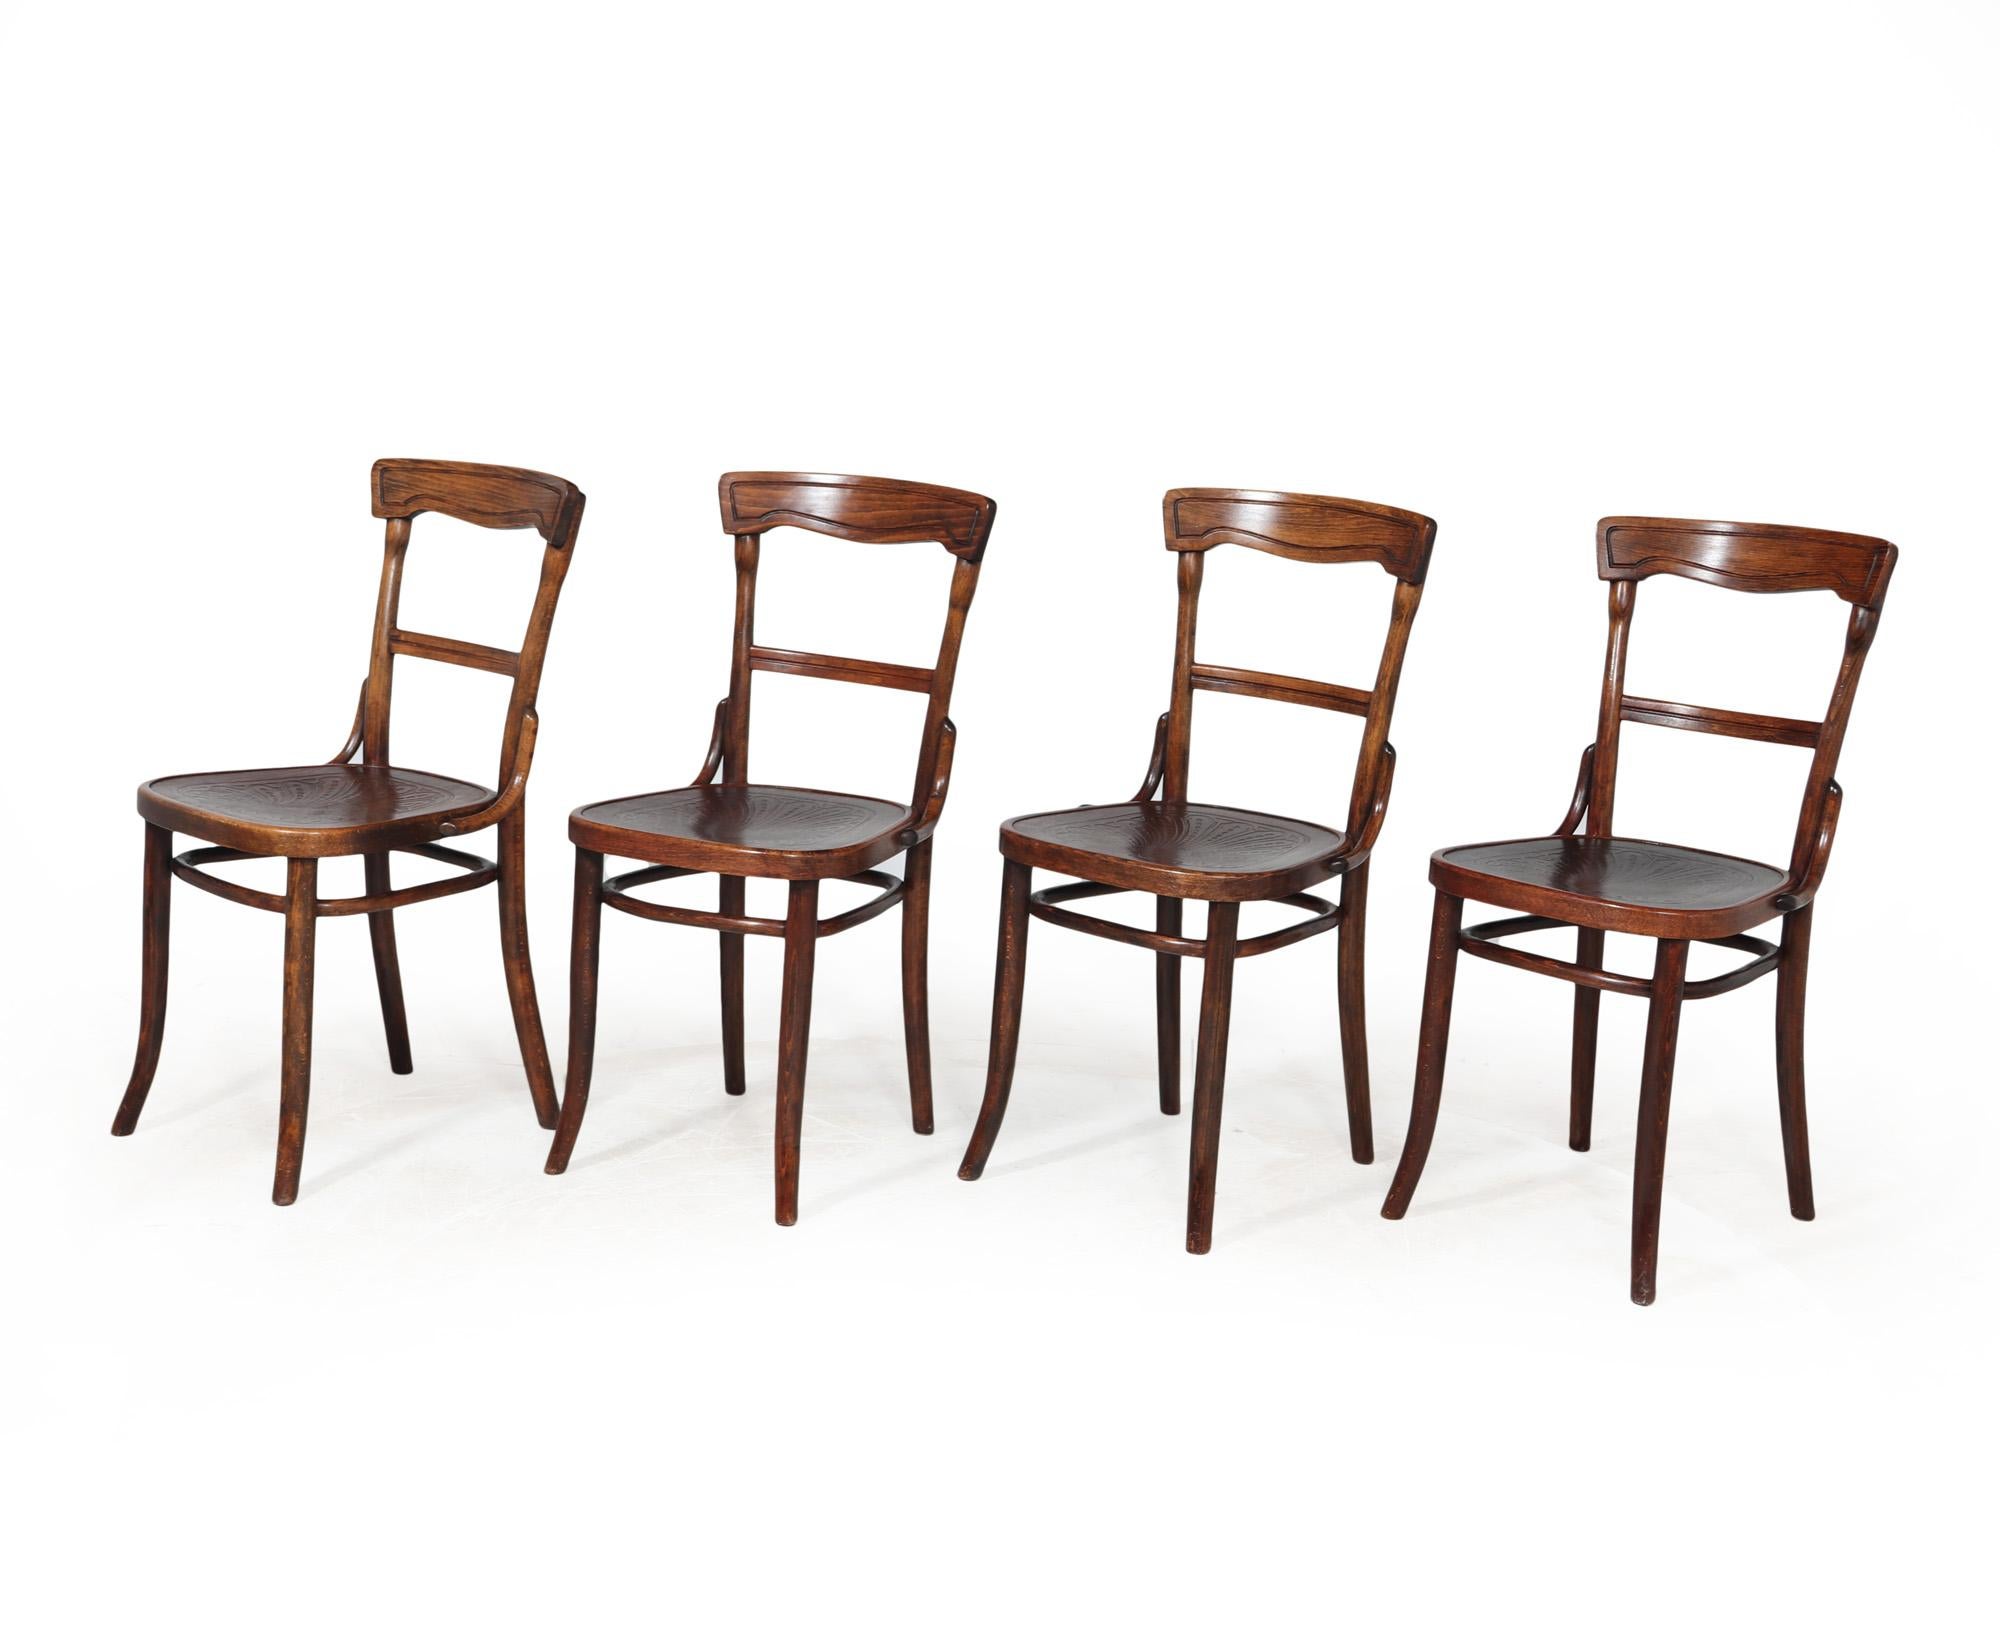 BENTWOOD CHAIRS BY THONET
We have a stunning set of four Thonet bentwood chairs dating back to around 1930. These chairs are a rare model, making them a unique addition to any space. Each chair has been meticulously cleaned and waxed, retaining